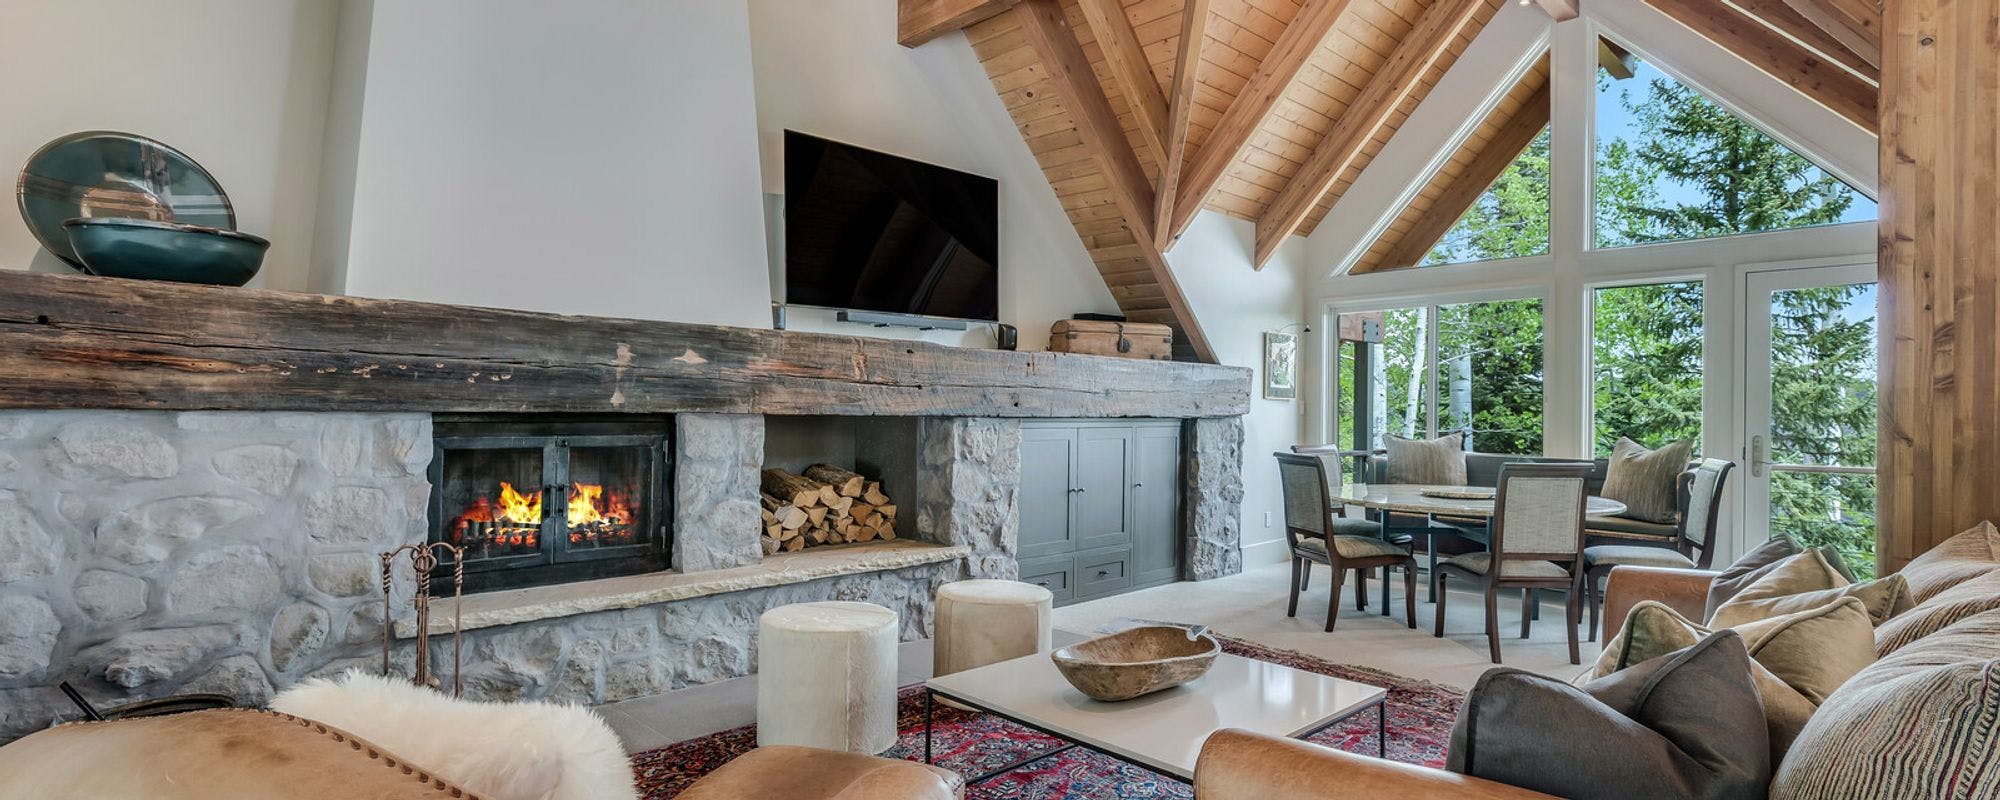 Luxury living space in a Snowmass Vacations rental home